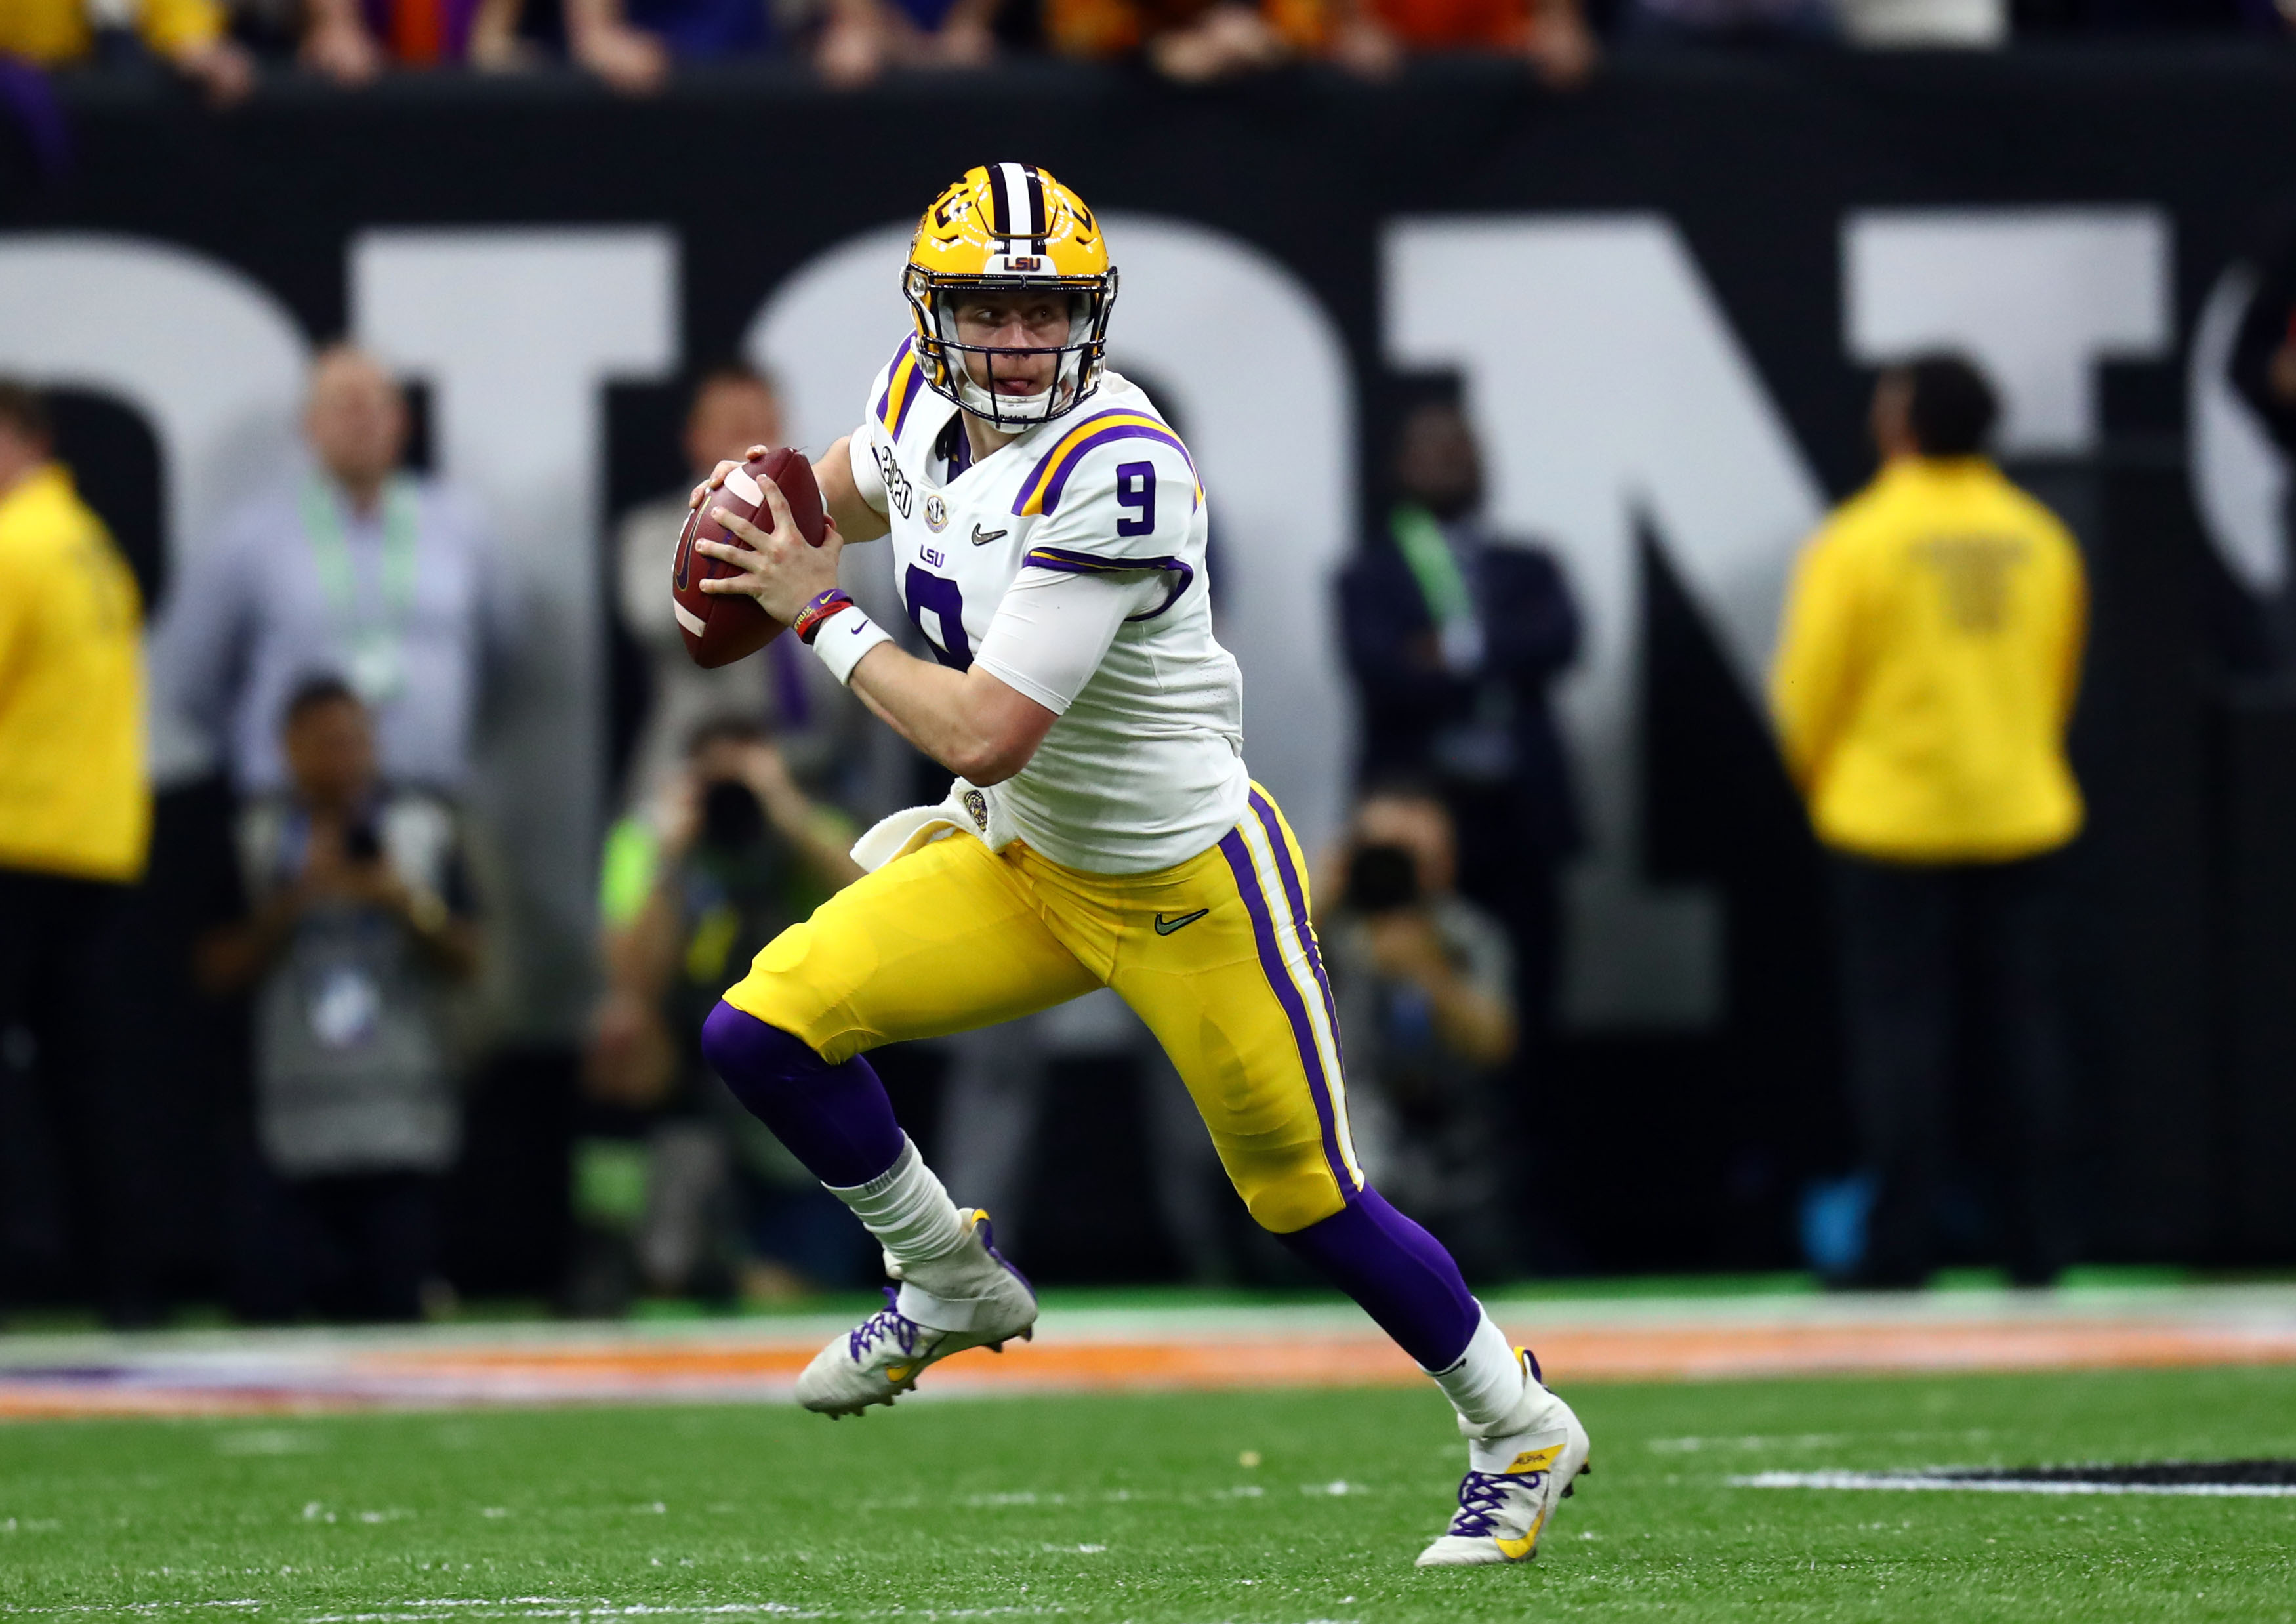 LSU Football Receives 16 Invites to 2020 NFL Draft Combine